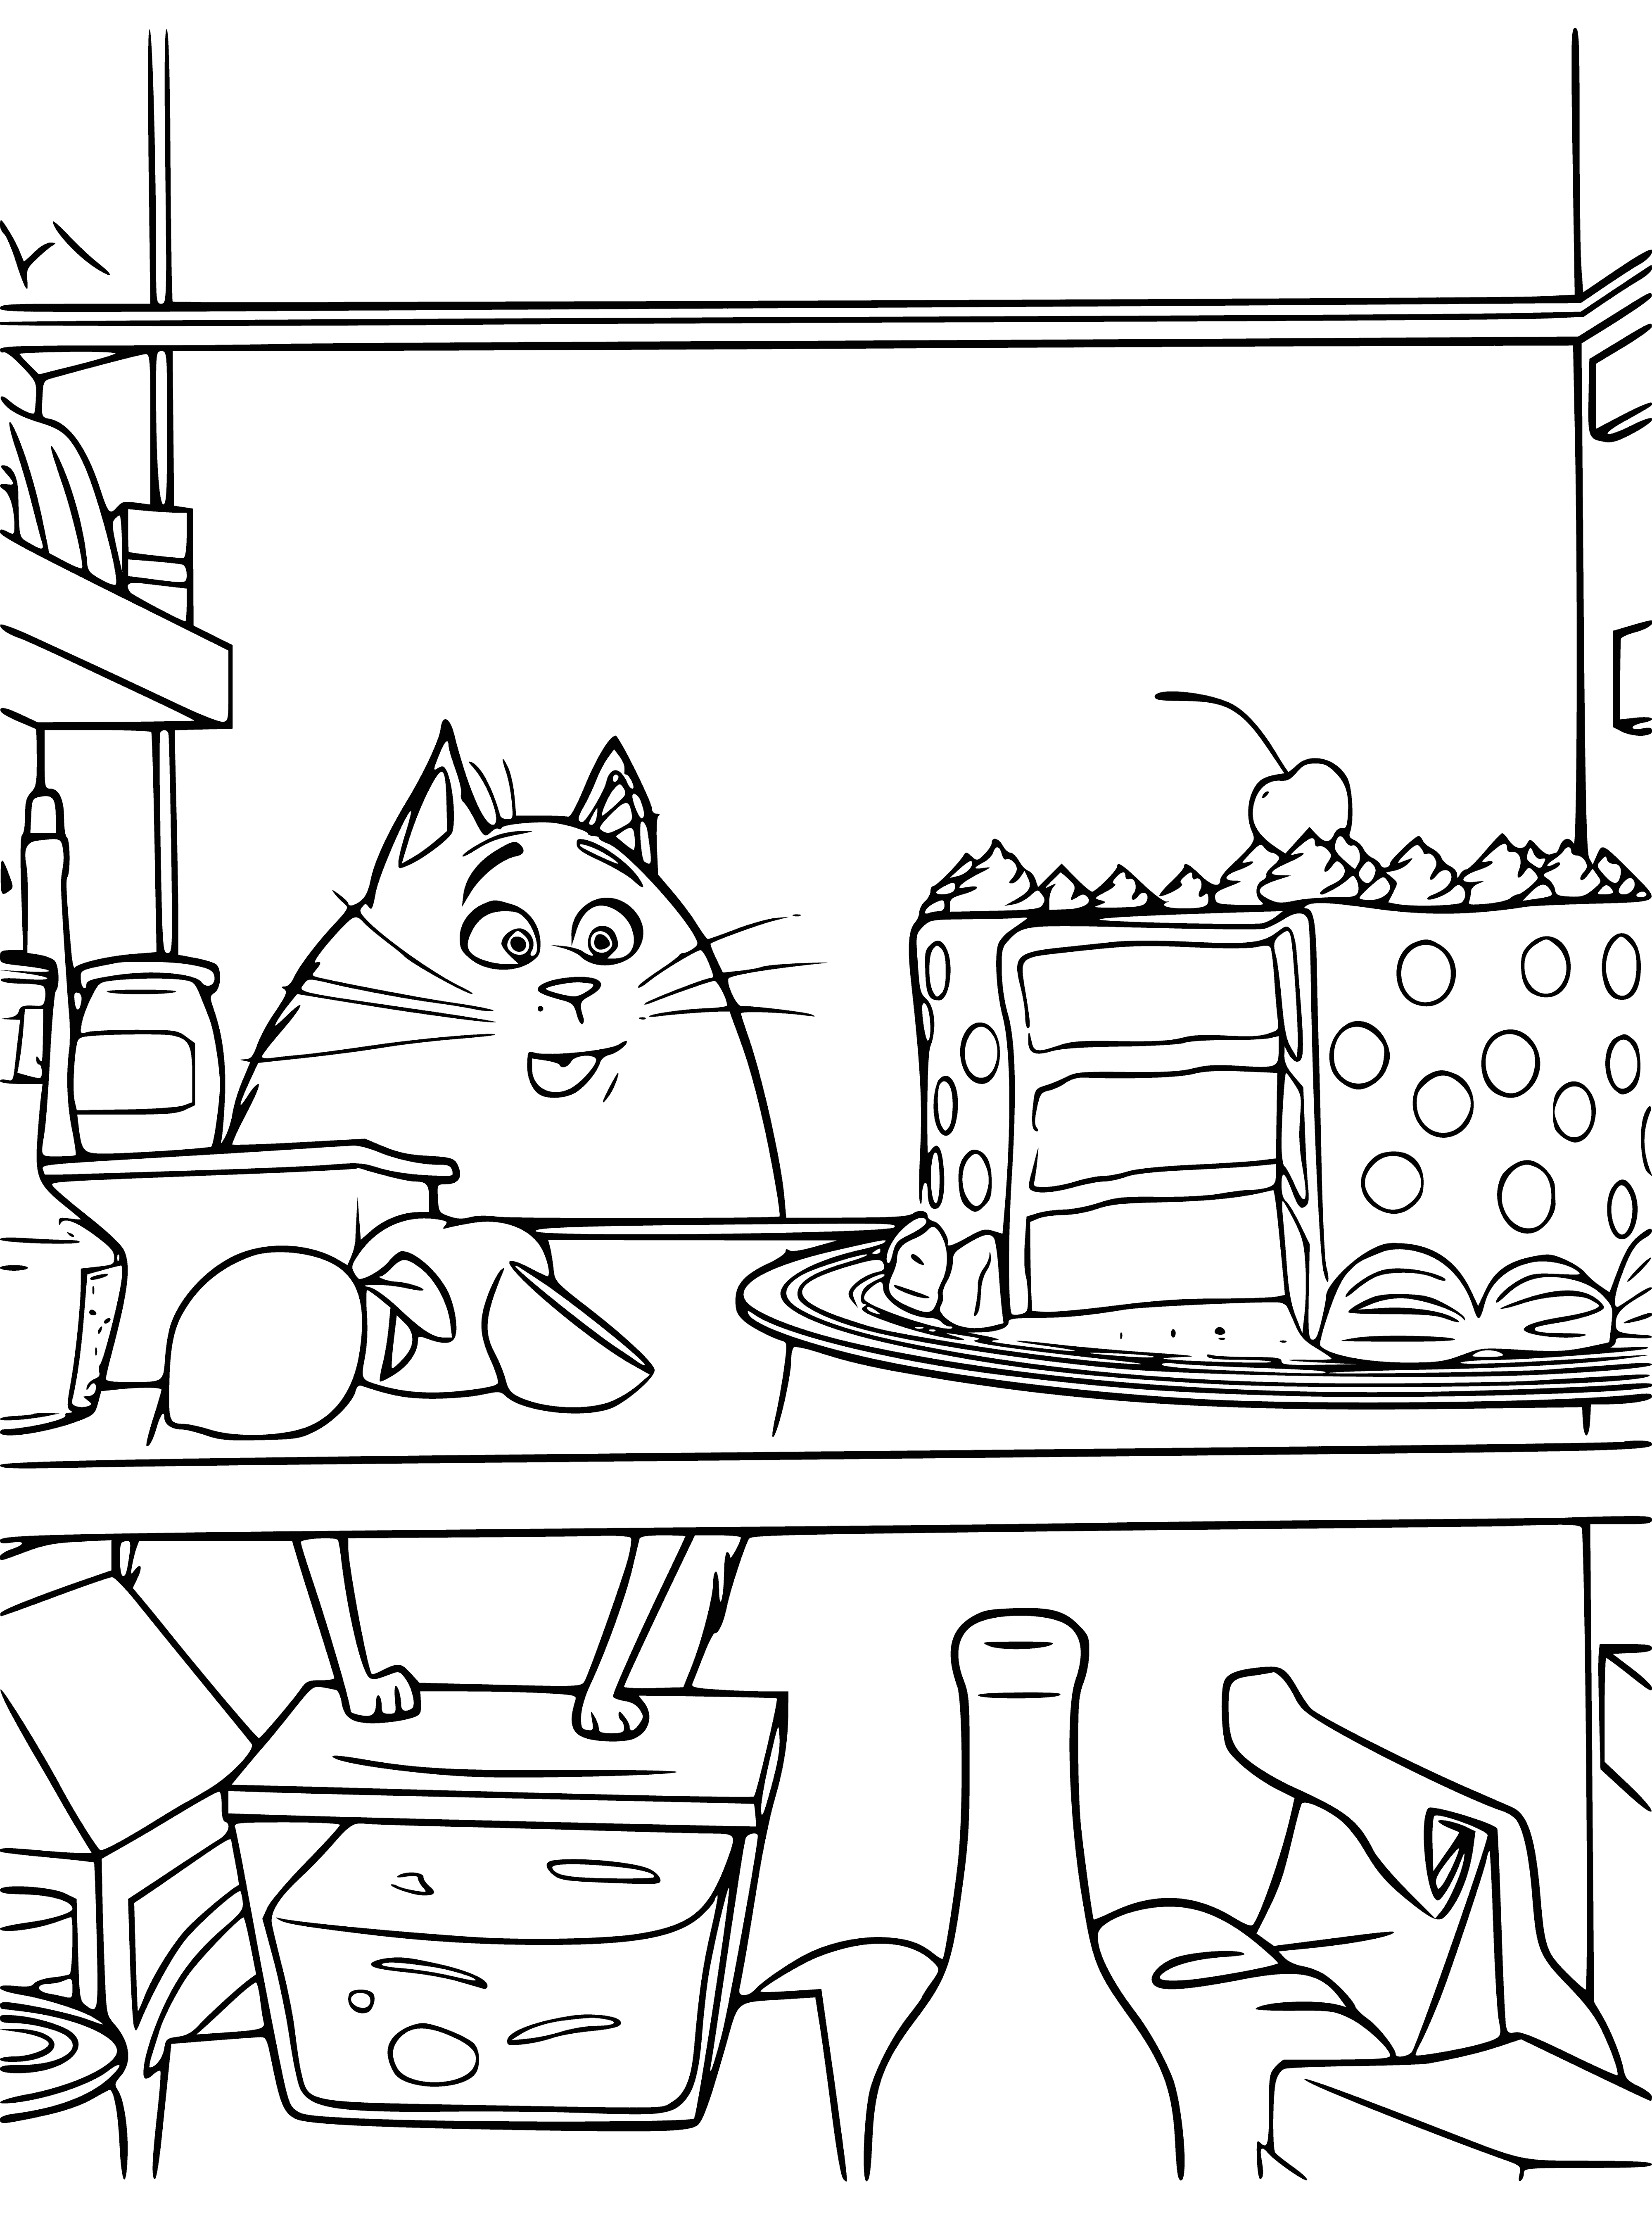 Chloe and cake coloring page